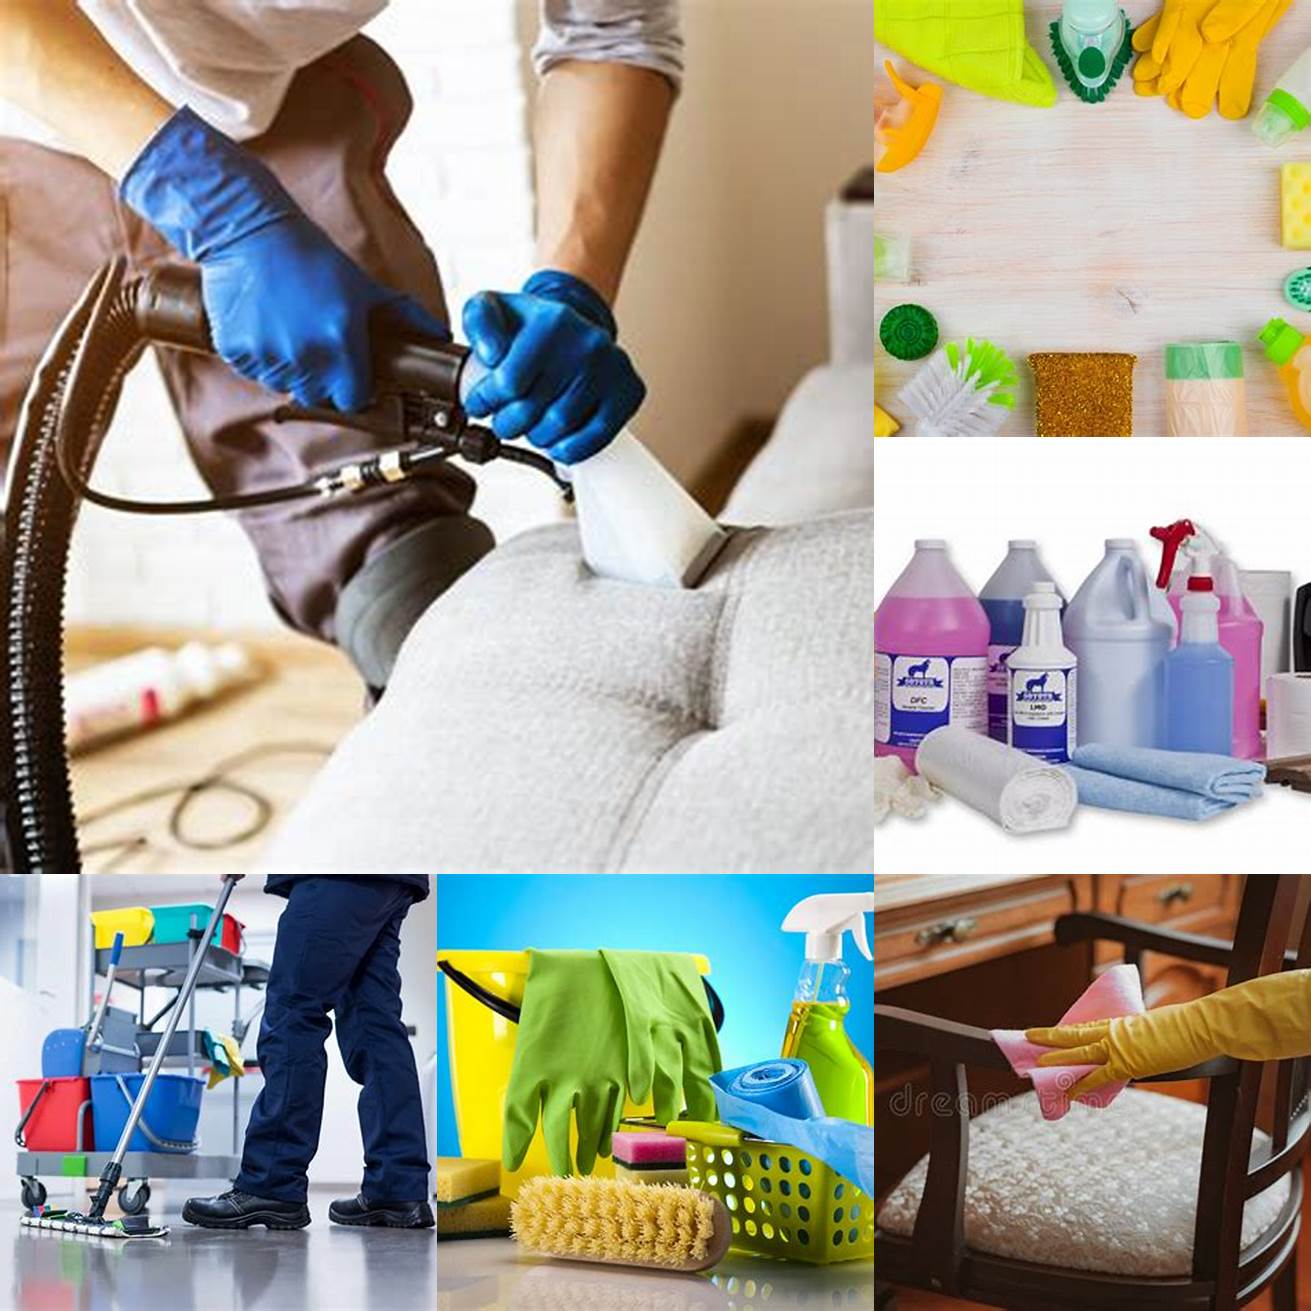 Cleaning and Maintenance Supplies